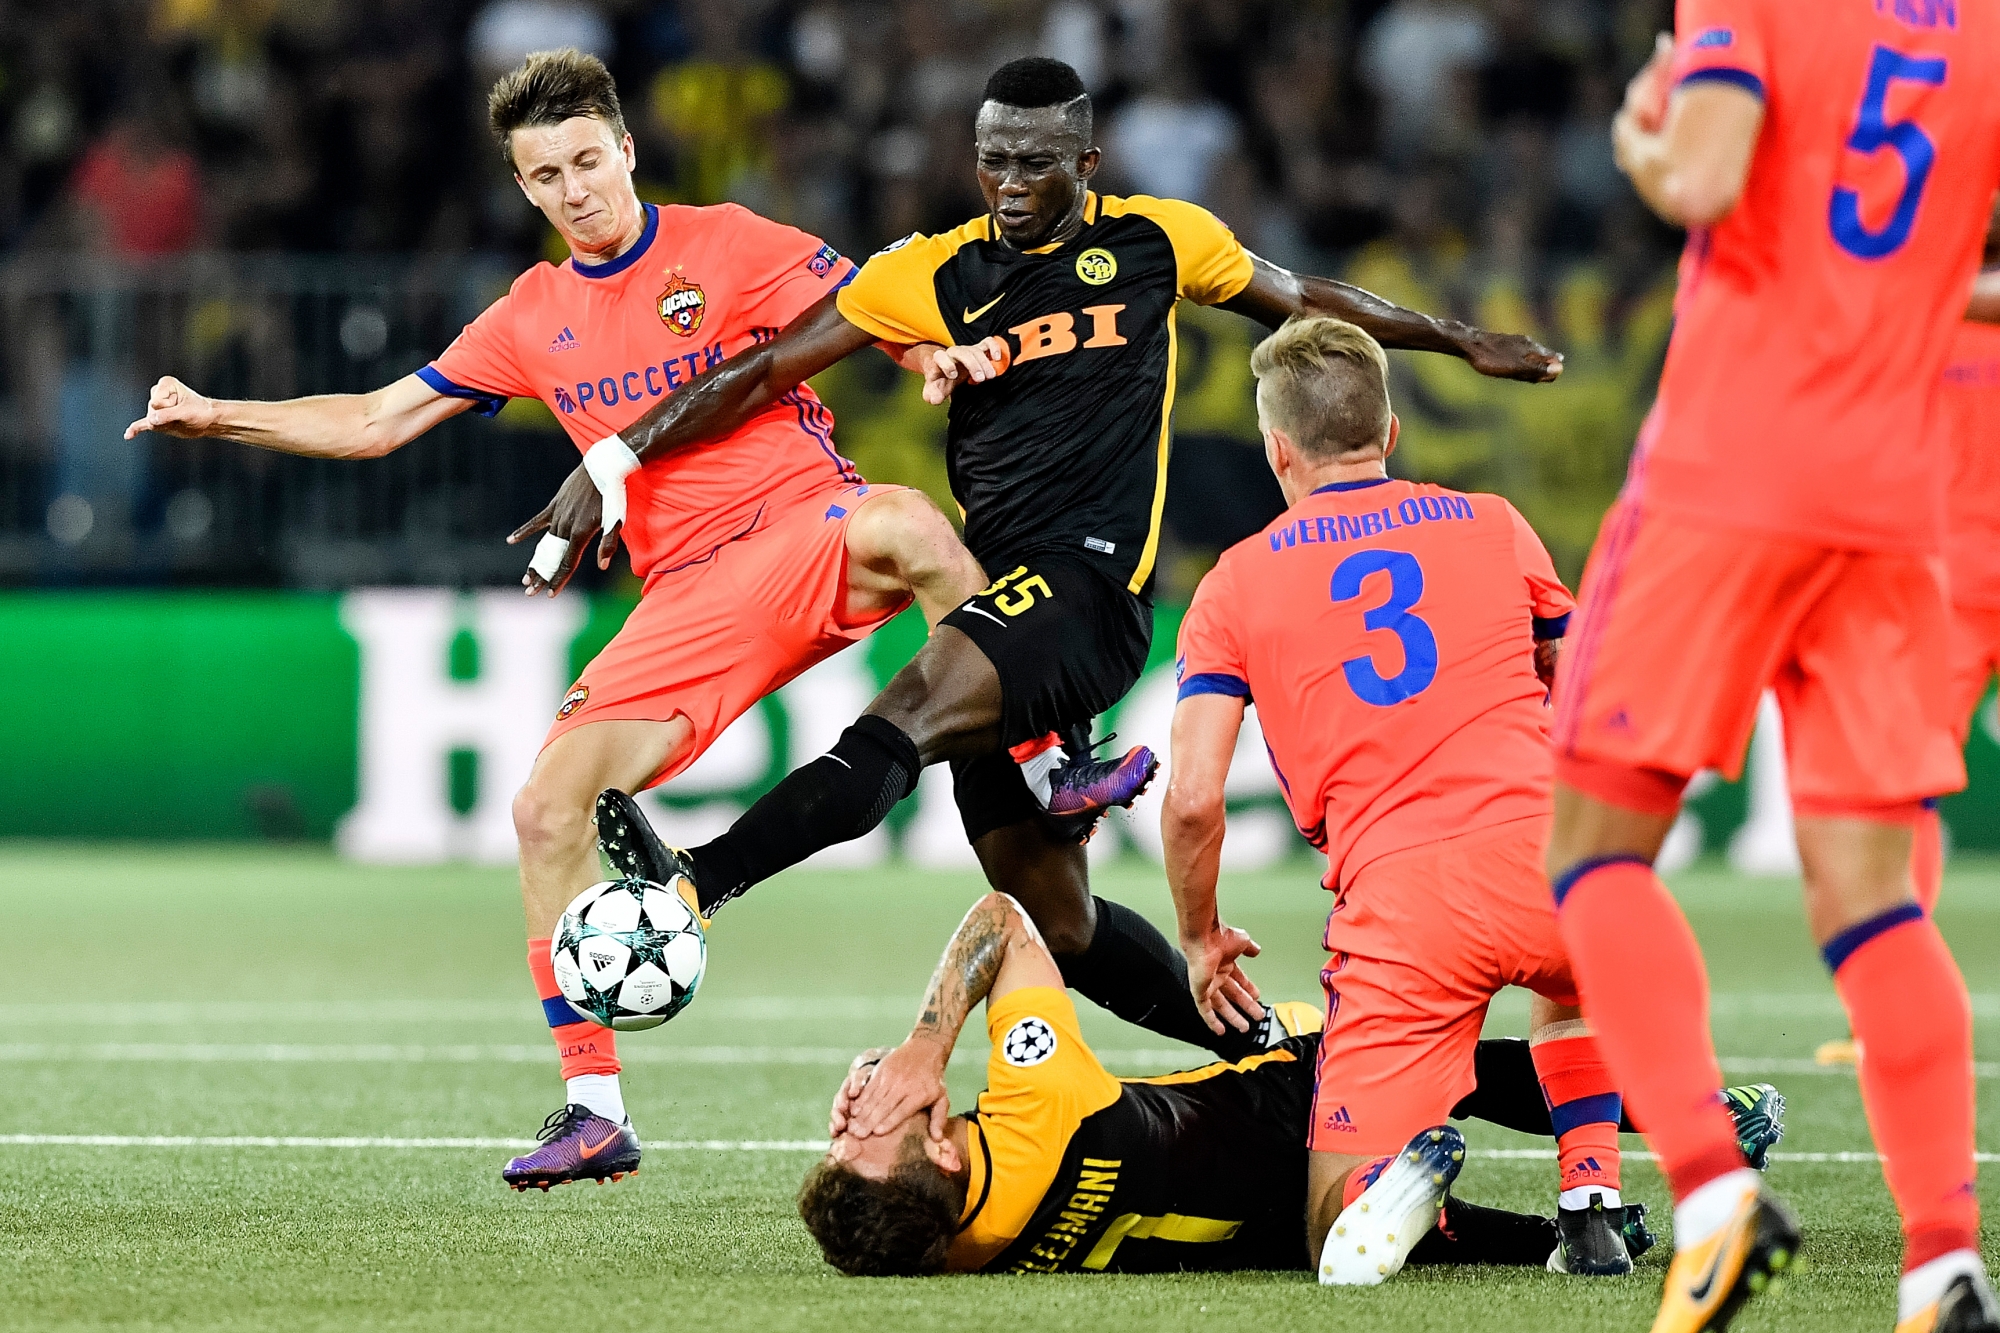 Bern's Sekou Sanogo, right, fights for the ball against Moscov's Aleksandr Golovin during the UEFA Champions League playoff match between Switzerland's BSC Young Boys and Russia's CSKA Moscov, in the Stade de Suisse Stadium in Bern, Switzerland, on Tuesday, August 15, 2017. (KEYSTONE/Peter Schneider) SWITZERLAND SOCCER CHAMPIONS LEAGUE